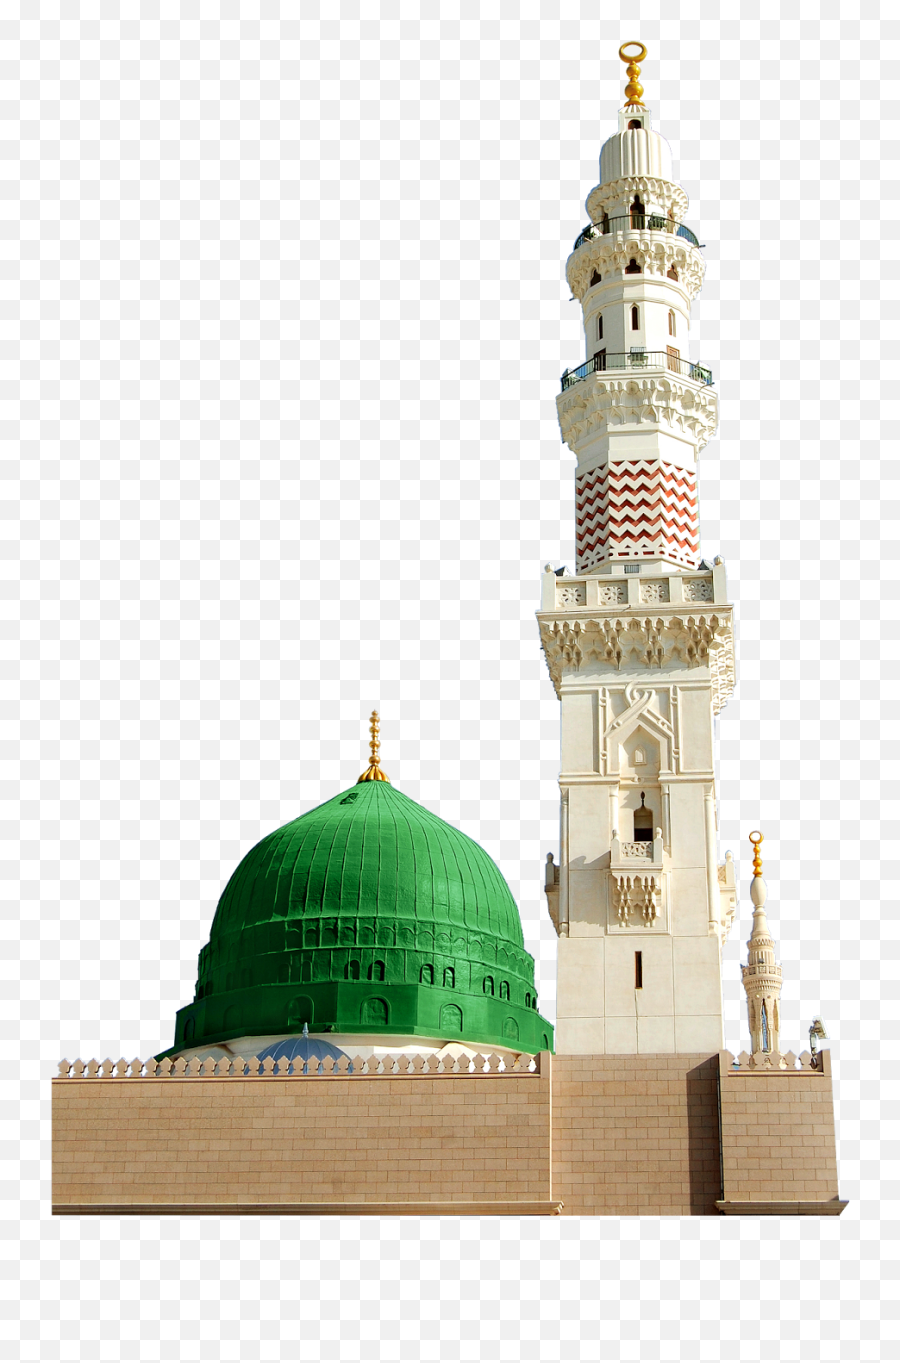 Download Mosque Designs Png - Background Masjid Nabawi Hd Al Masjid An Nabawi,Png Background Hd